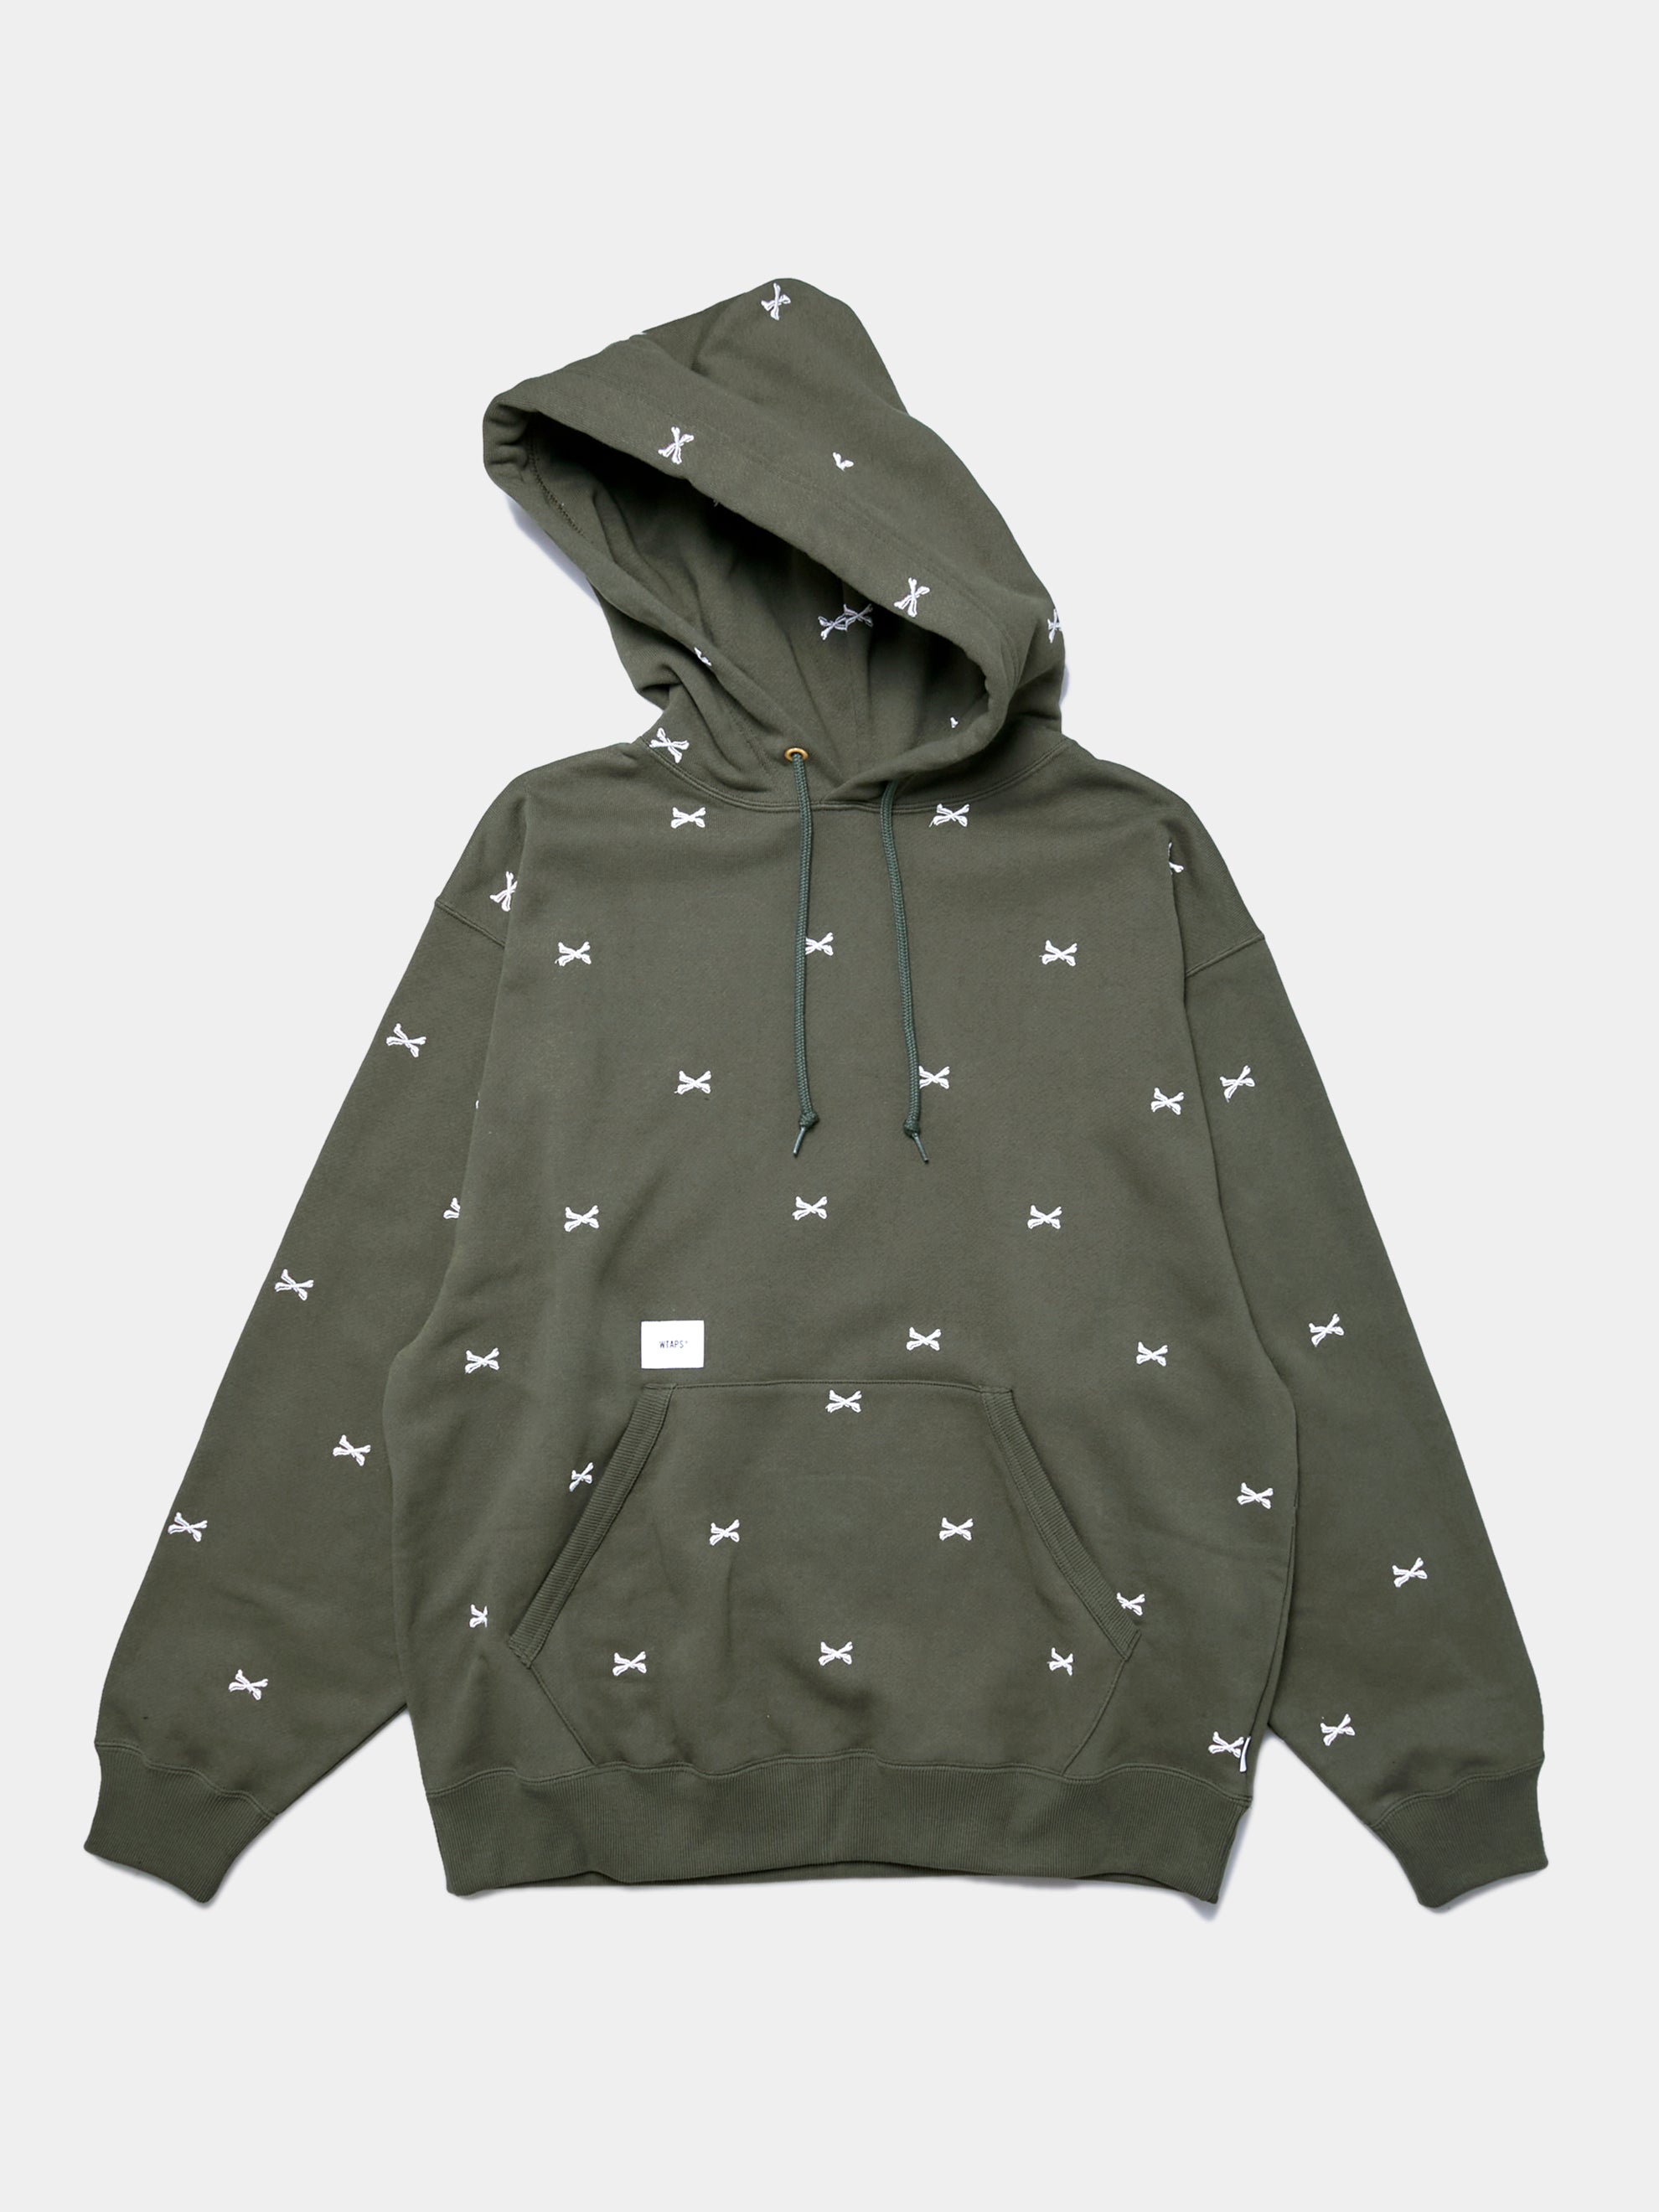 Buy Wtaps ACNE / HOODY / COTTON Online at UNION LOS ANGELES